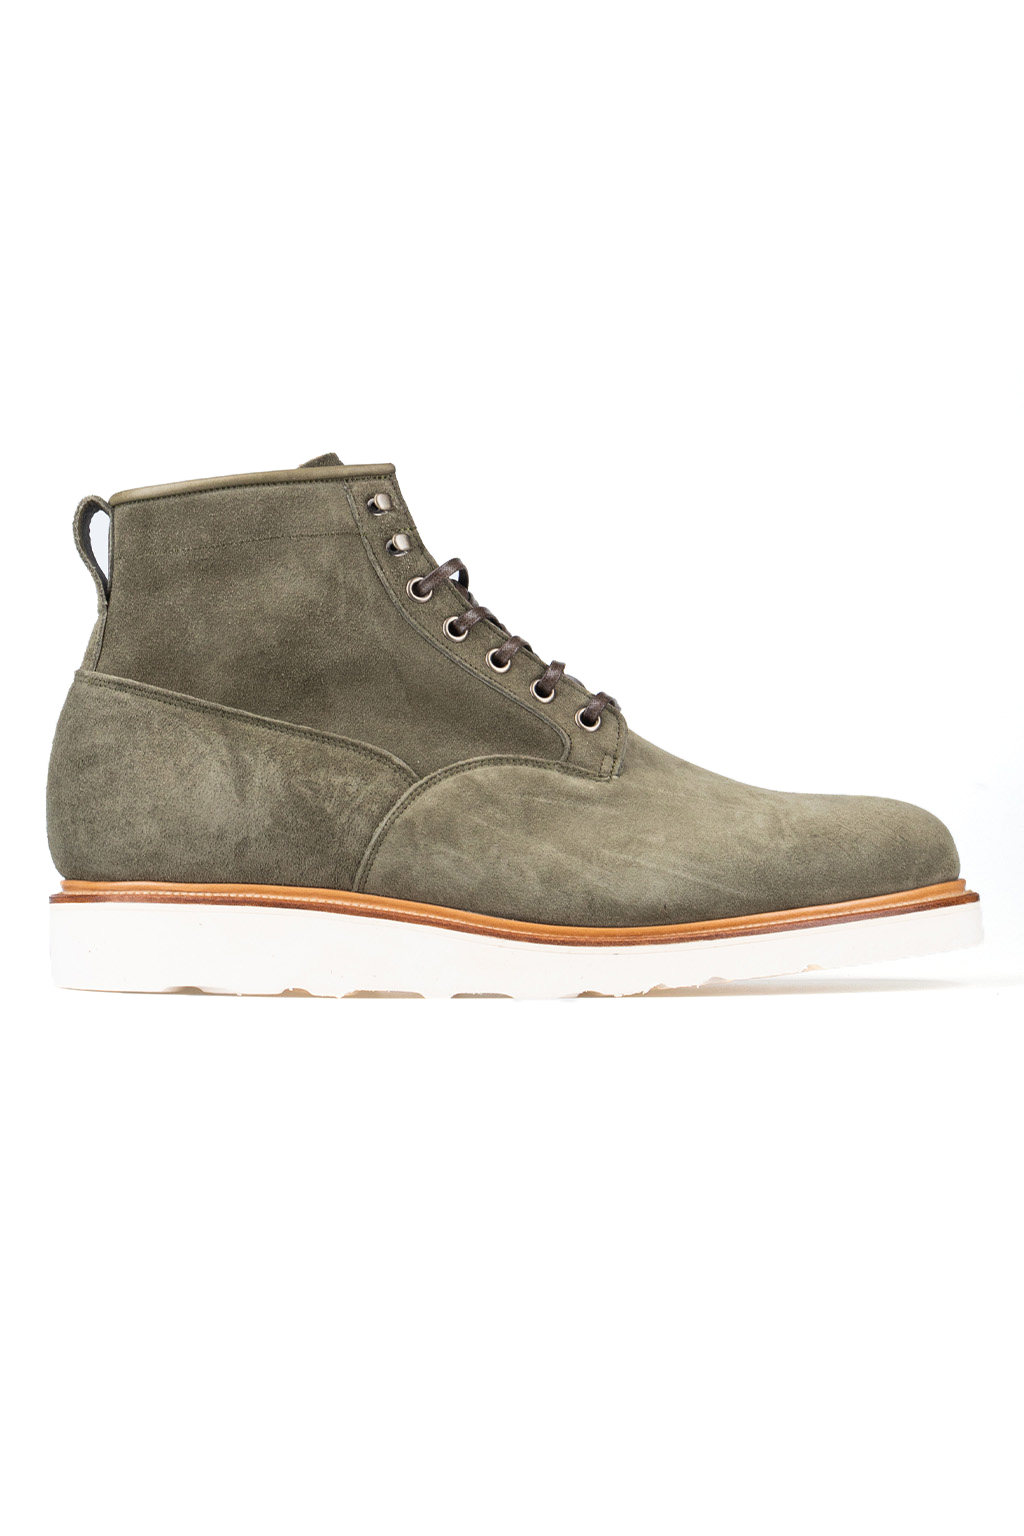 Viberg Scout Boot - Olive Green Calf Suede